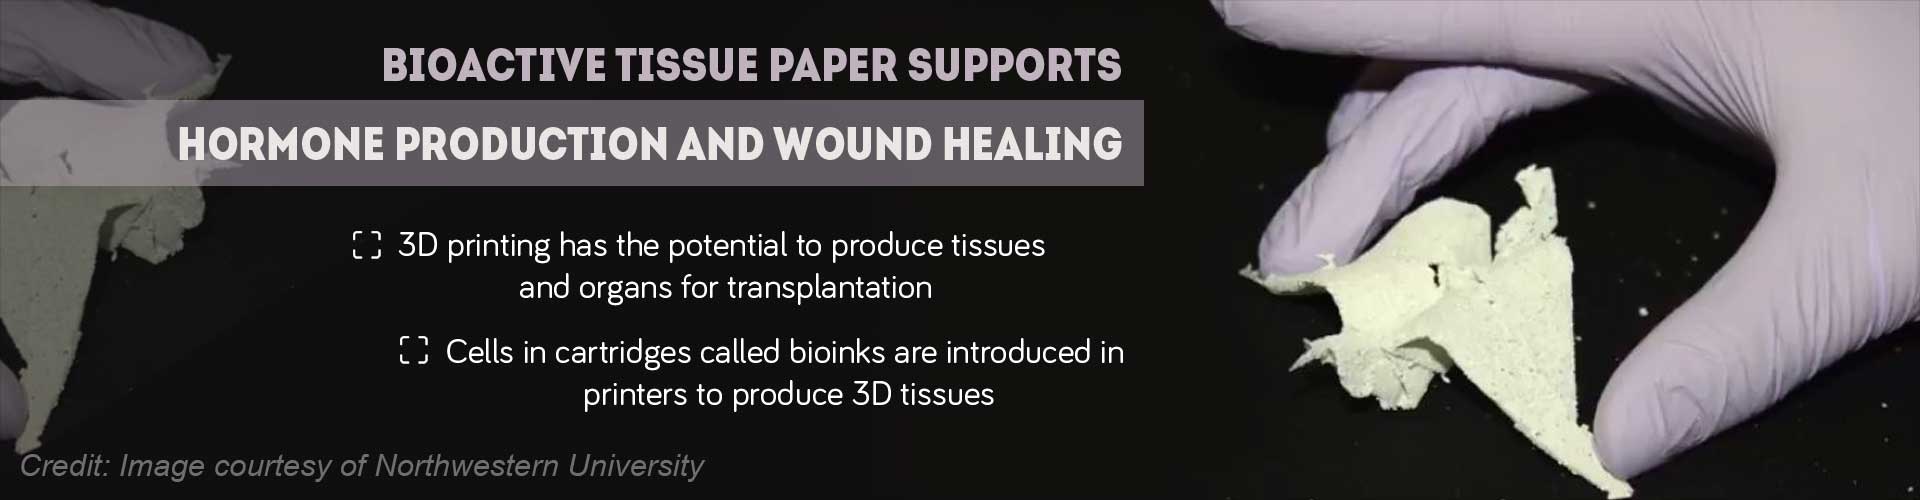 Bioactive tissure paper supports hormone production and wound healing
- 3D printing has the potential to produce tissues and organs for transplantation
- cells in cartridges called bioinks are introduced in printers to produce 3D tissues